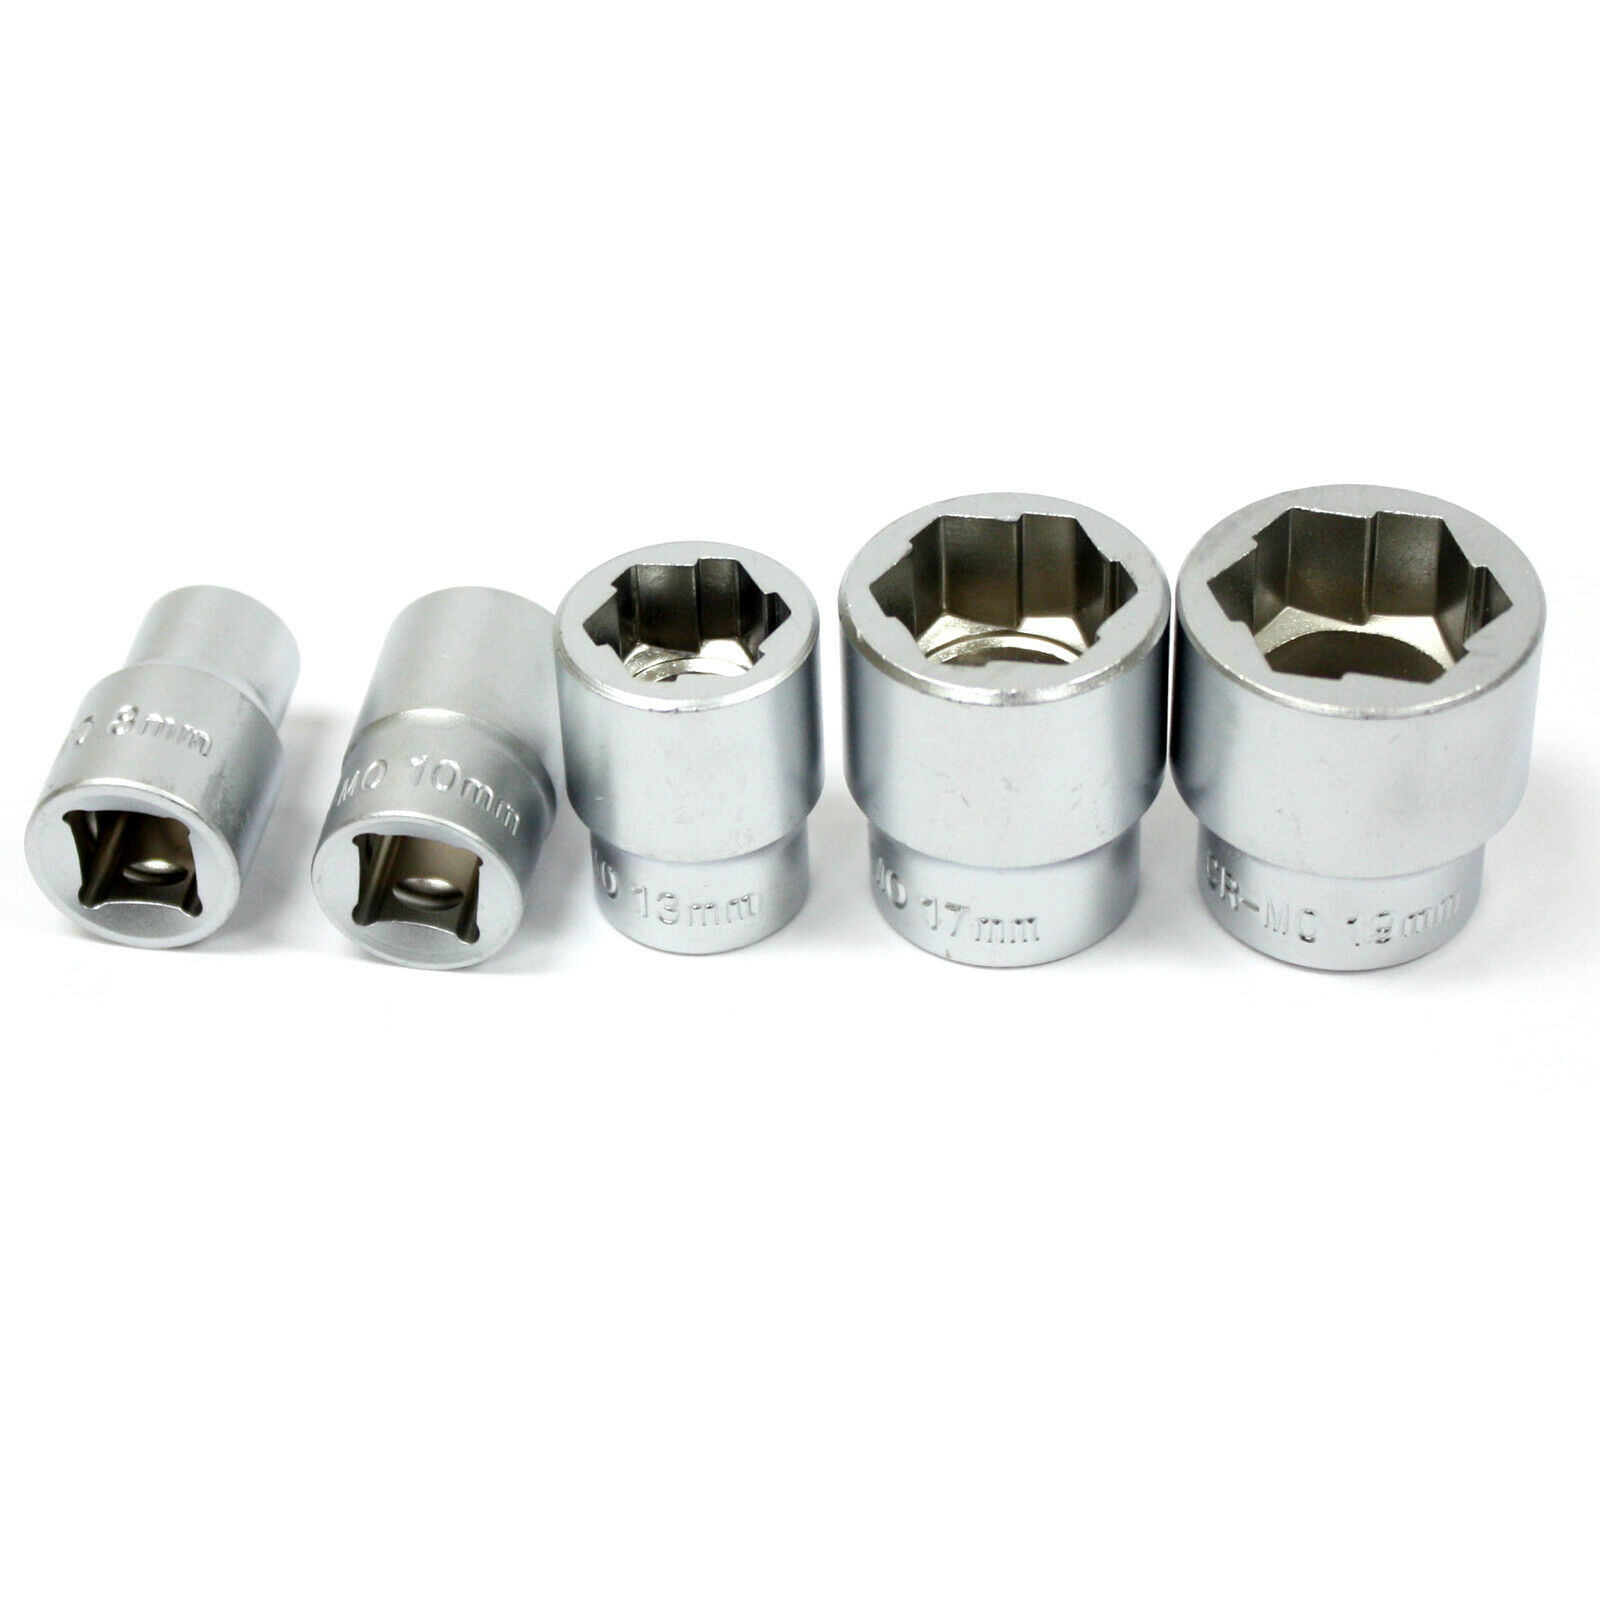 5 Piece 3/8" Drive Impact Bolt Extractor Set 8mm,10mm,13mm,17mm,19mm. 